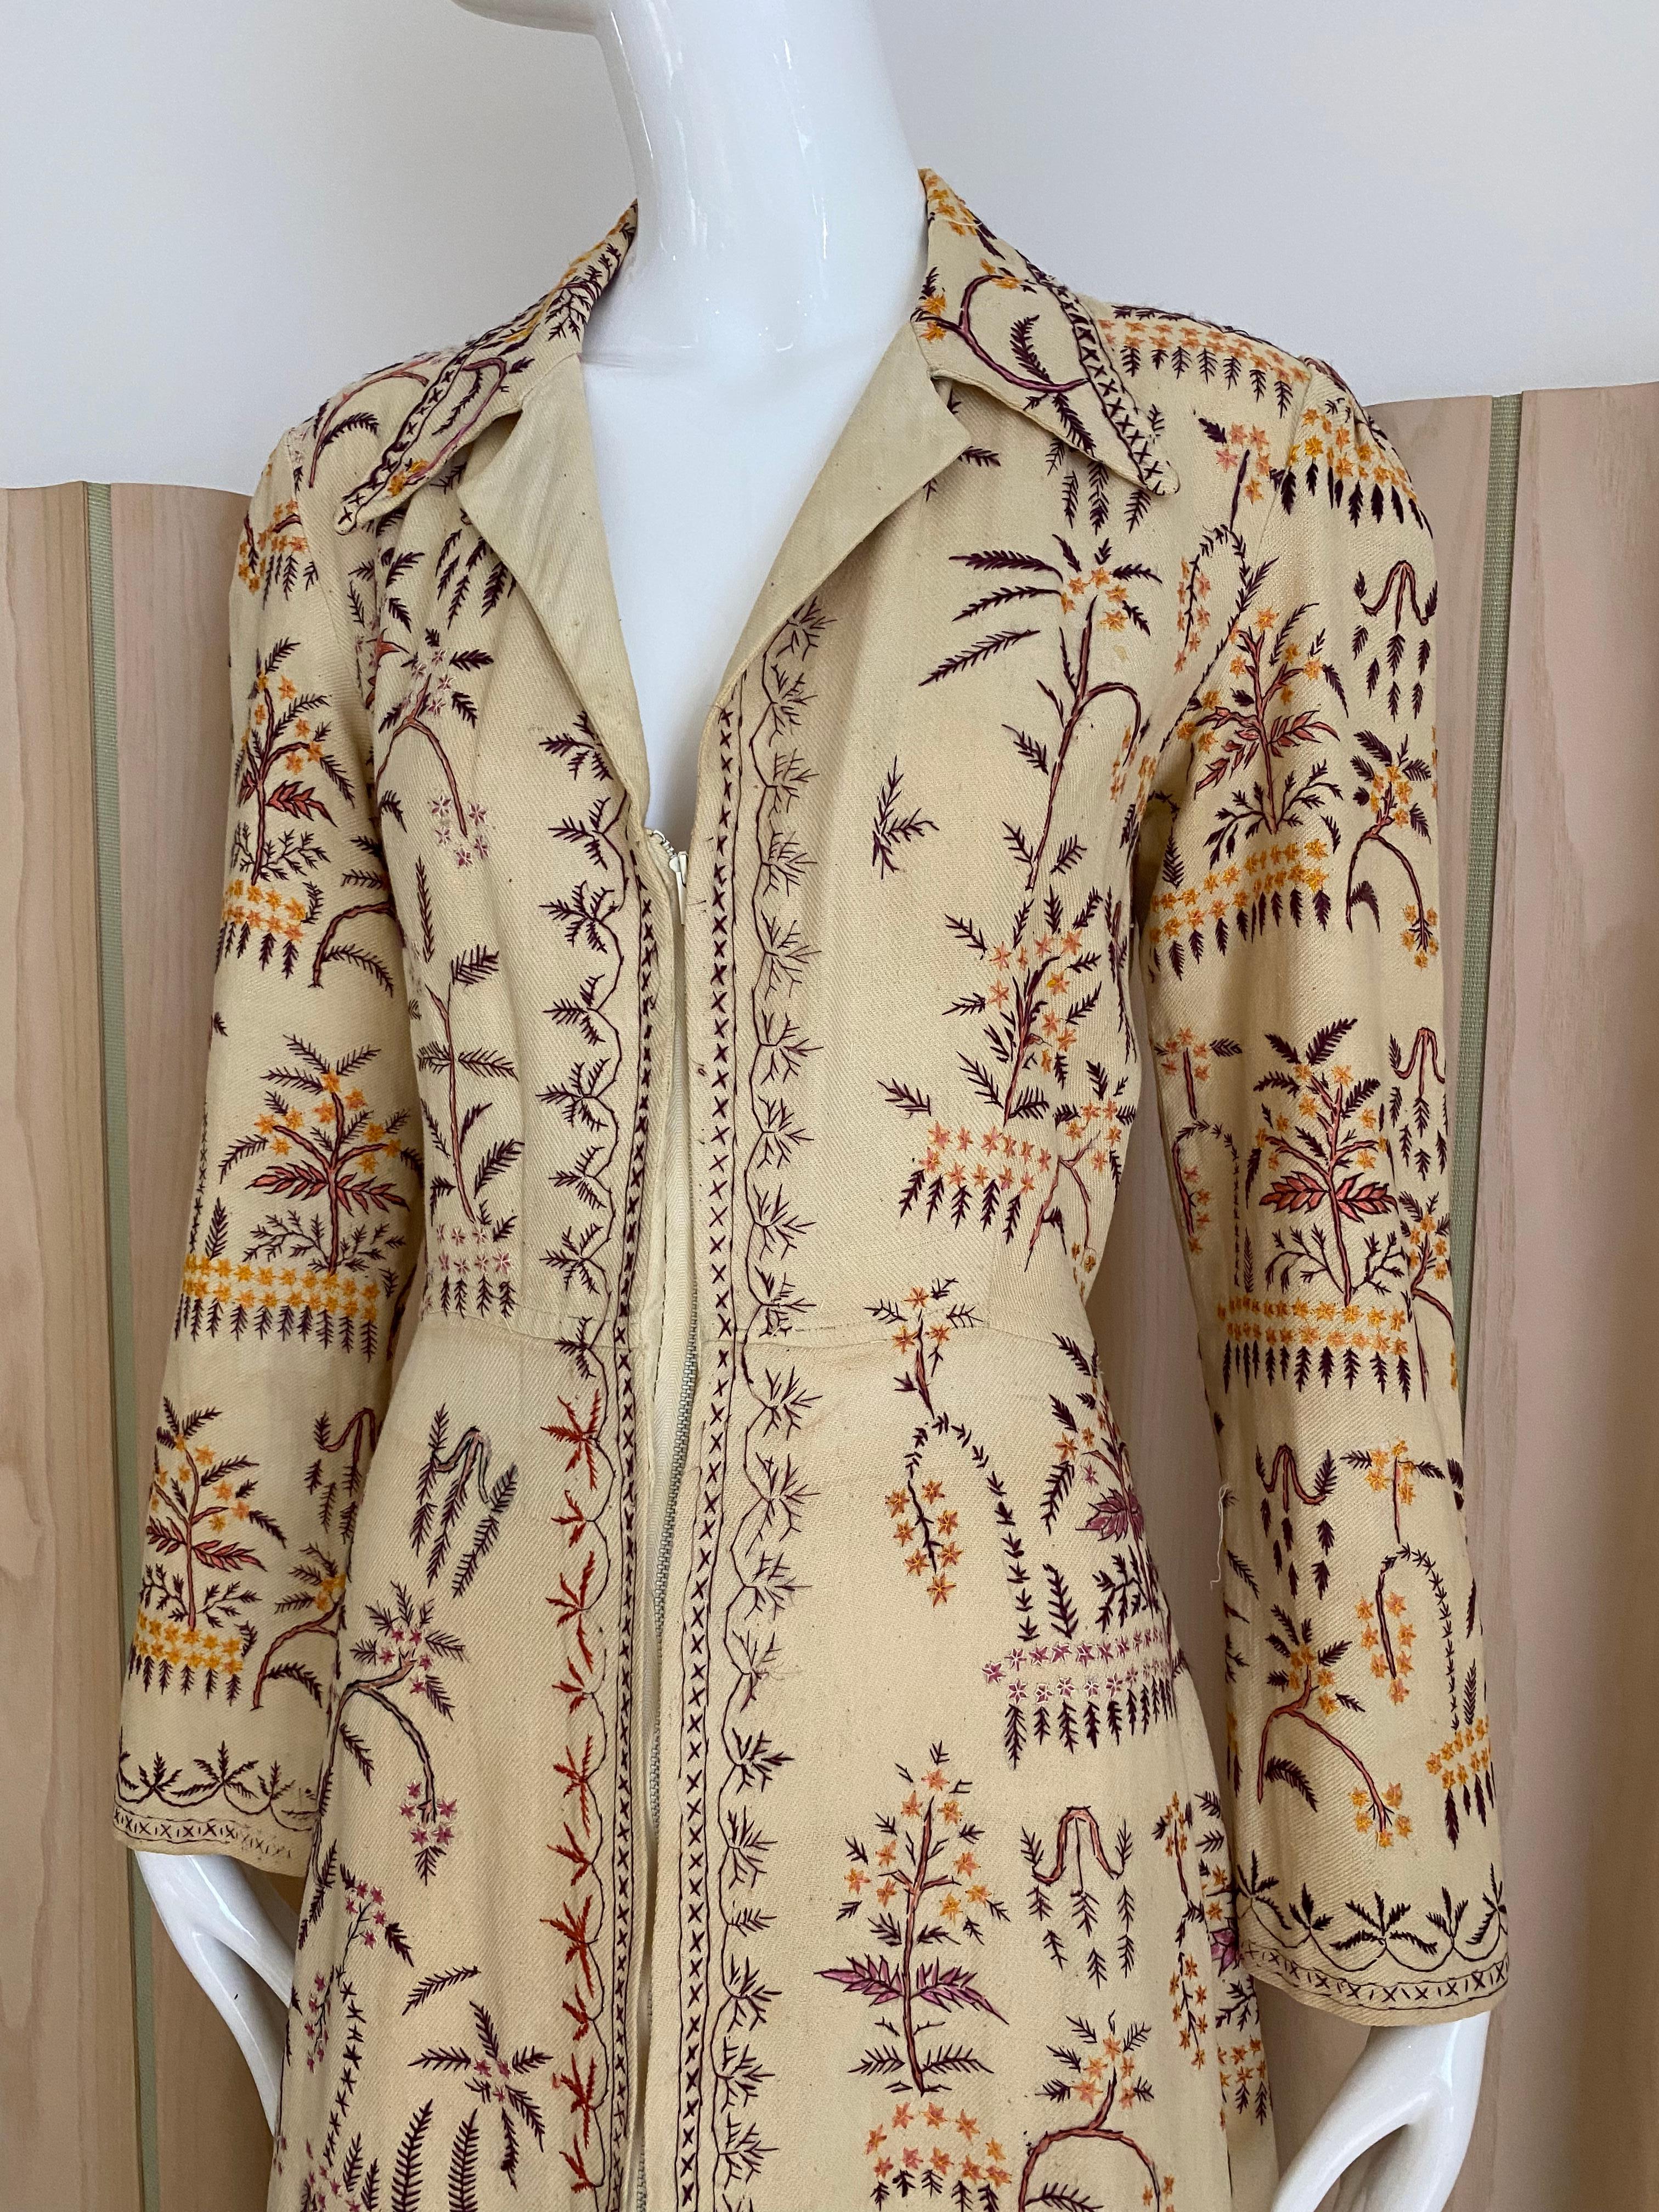 1940s Cream Cotton coat dress embroidered with multi color yellow, brown, red and pinks ferns .
- Long sleeves
- Front zipper
Size Medium
Measurement: B 38” / W 30”  / Hip  40” / Shoulder: 19” / Sleeve length / Dress length: front hem 54/ back hem